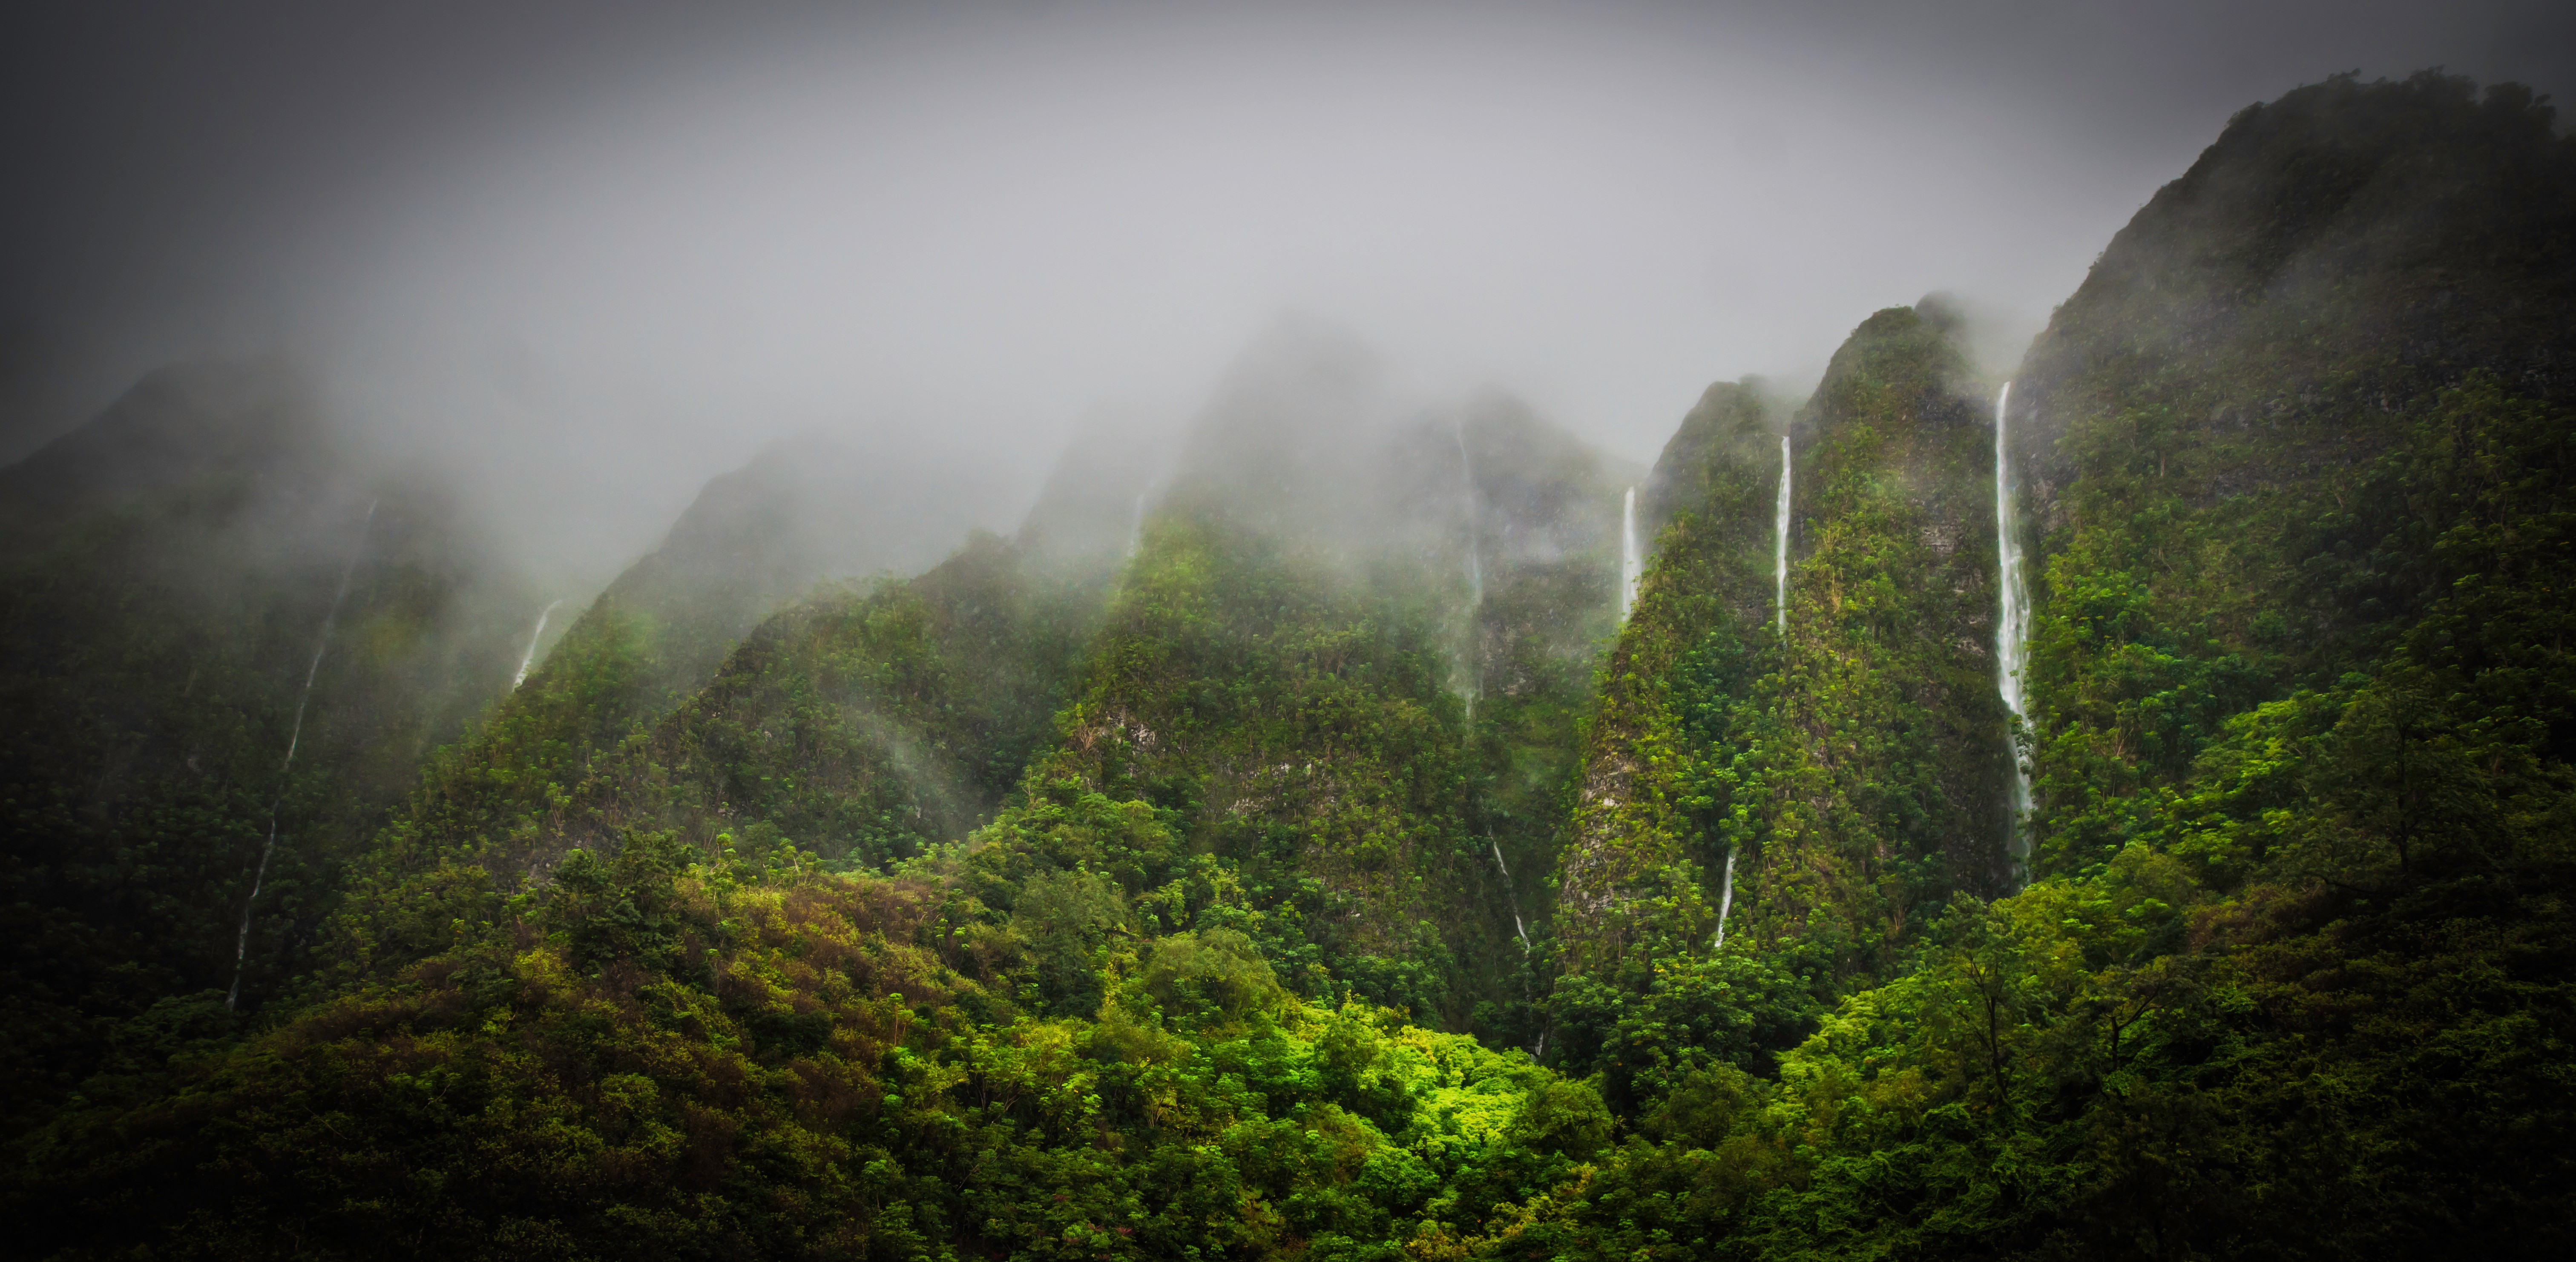 General 6048x2964 waterfall nature landscape mist forest mountains Hawaii USA oahu